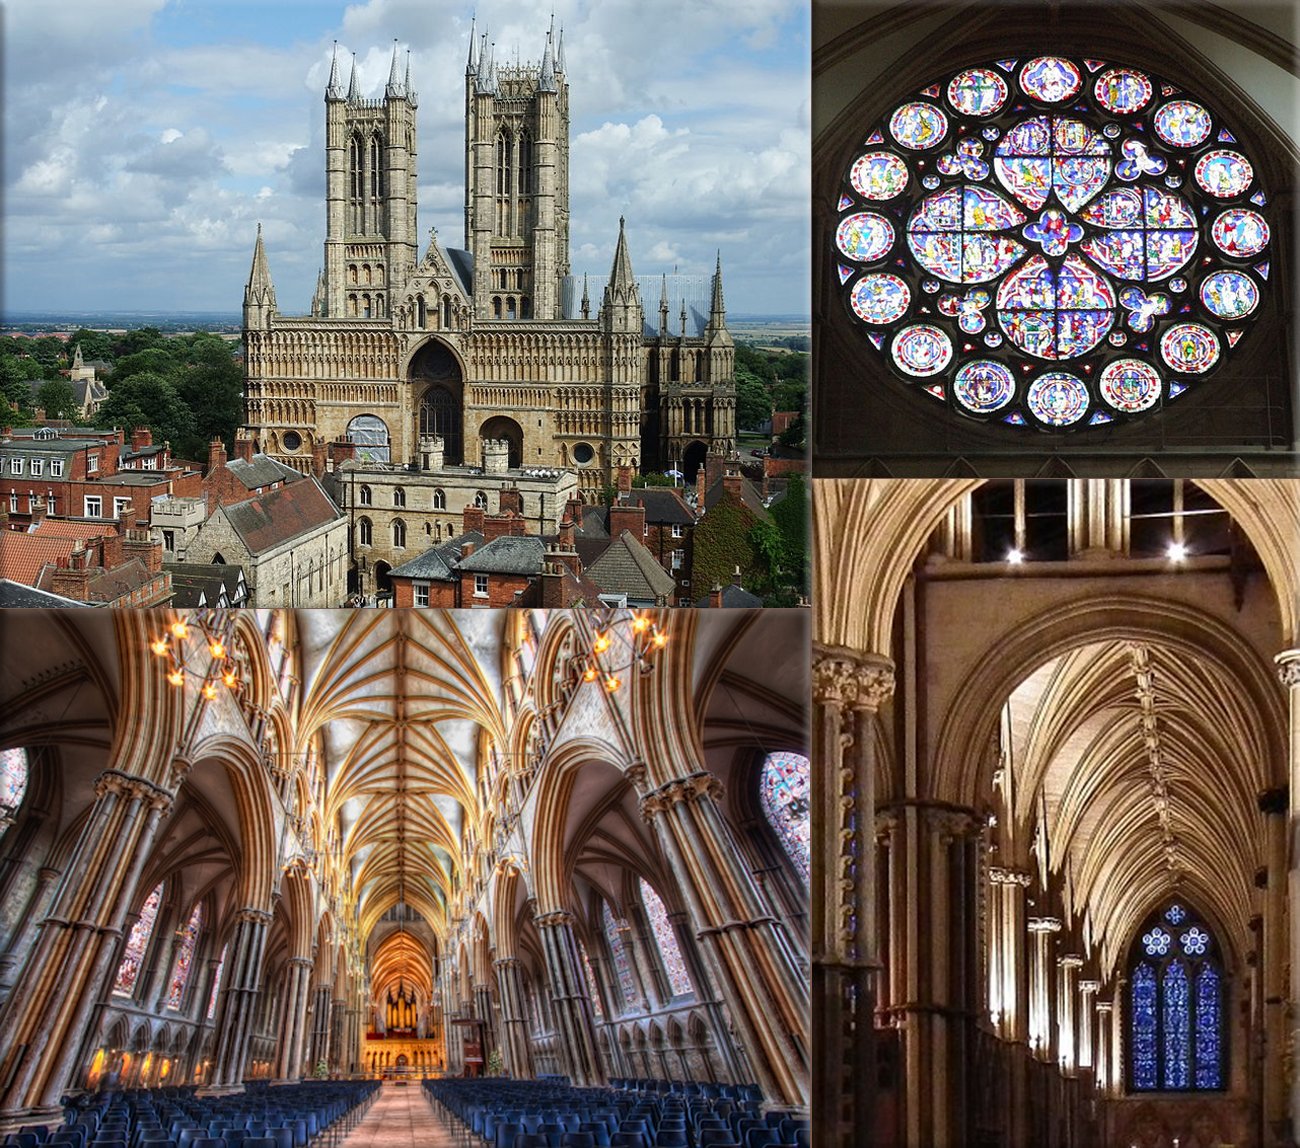 Lincoln Cathedral is consecrated on May 9th, 1092